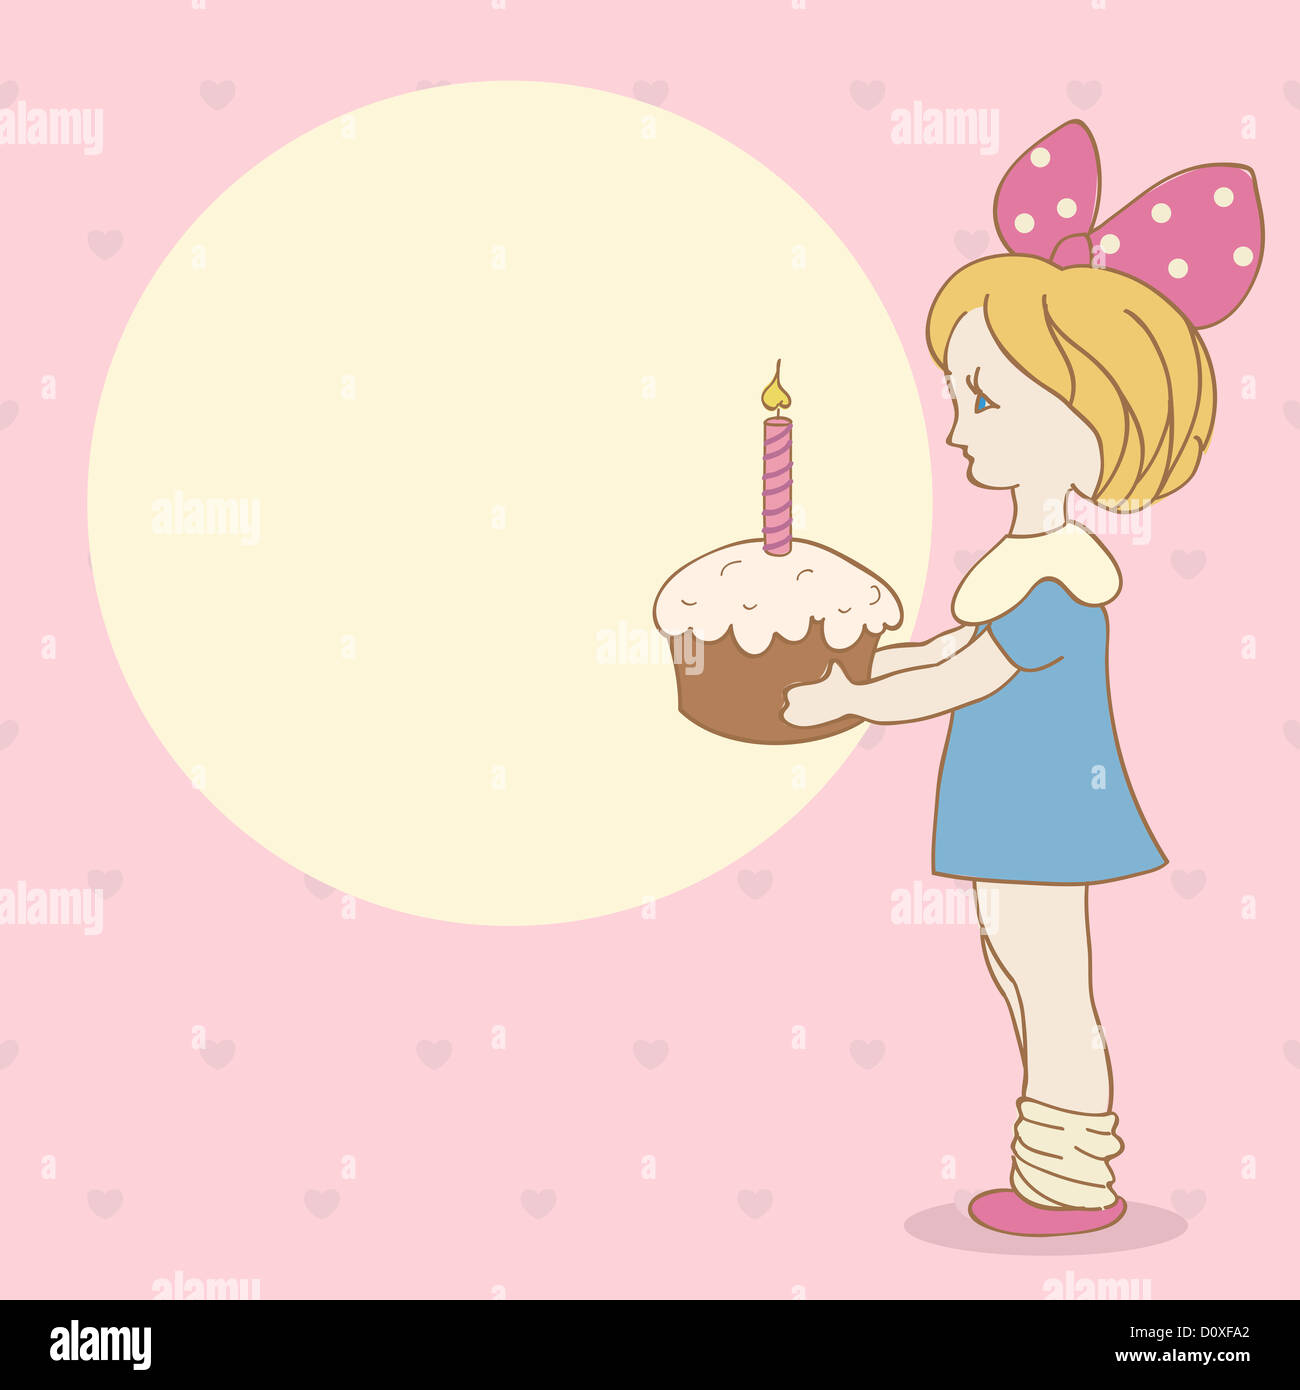 Invitation card with girl and cake. Birthday background Stock Photo - Alamy